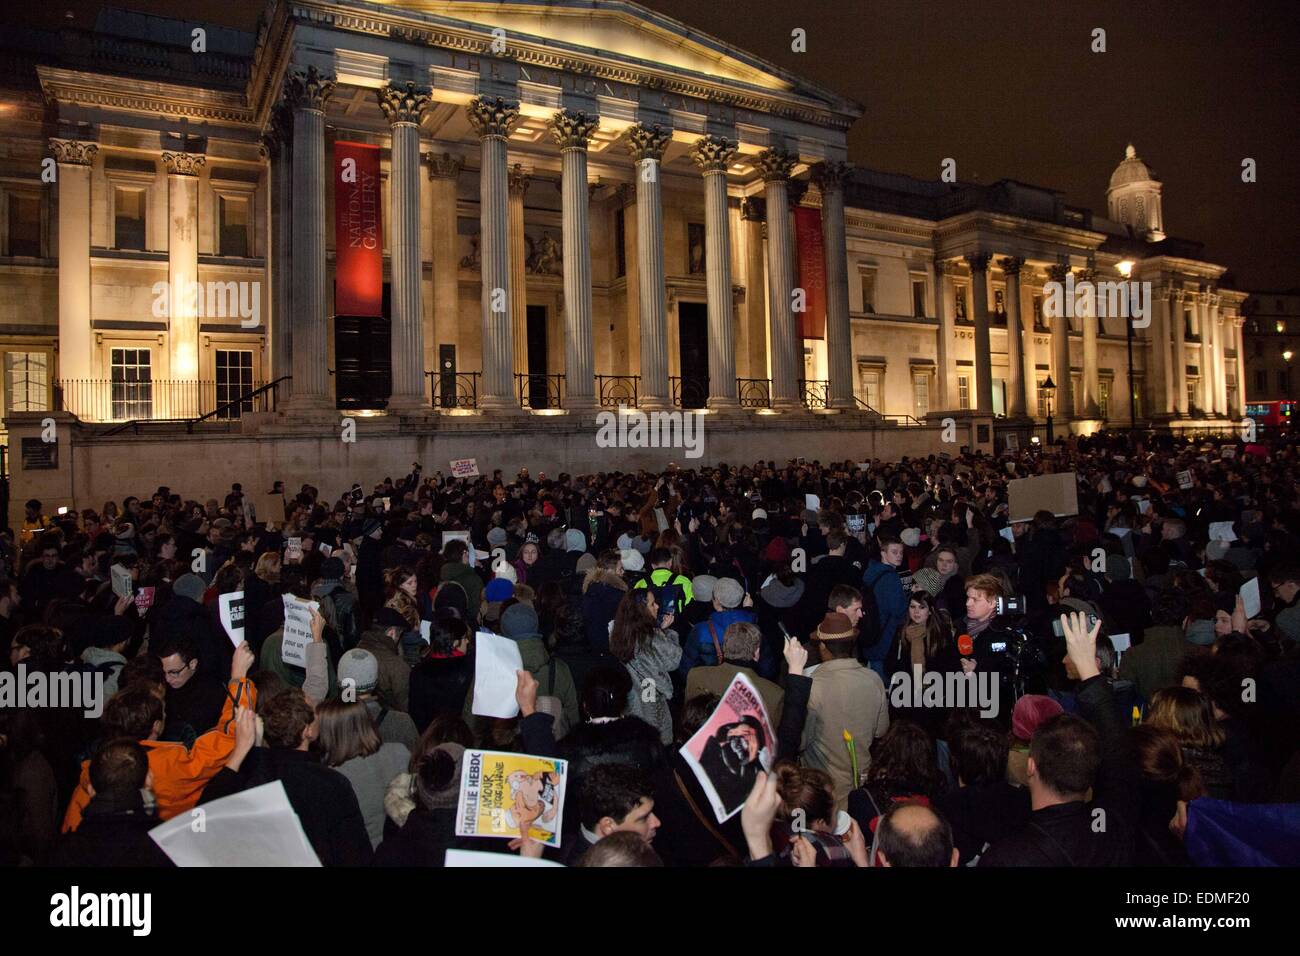 London, UK. 7th January, 2015. A vigil was held in London tonight, and in other cities around the world, in support of the victims of the attack at French magazine Charlie Hebdo in which 12 people were killed Credit: © nelson pereira/Alamy Live News  Stock Photo